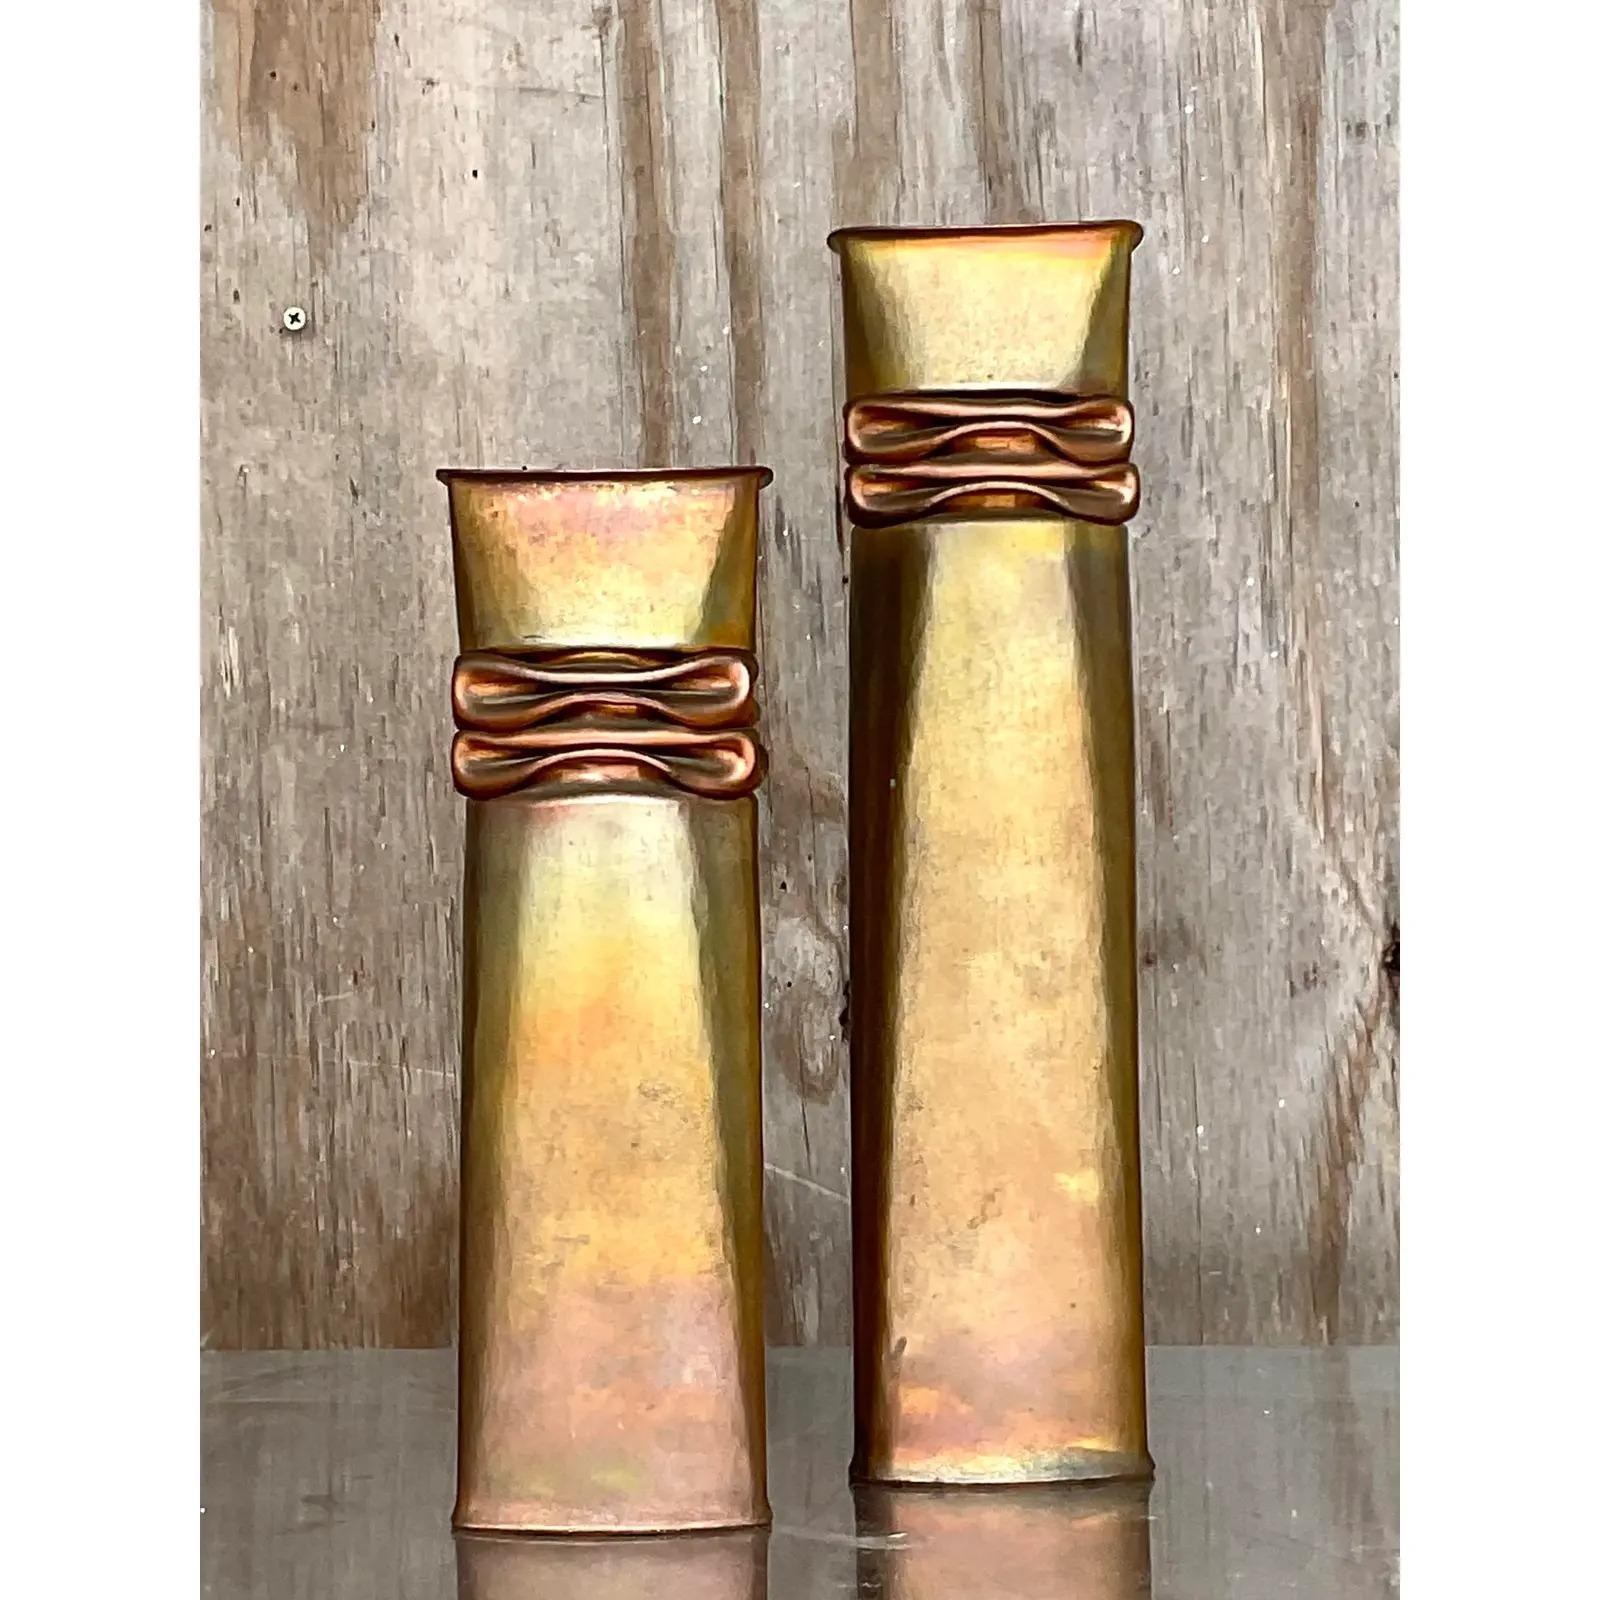 Spectacular pair of vintage nickeled copper vases. Hand crafted by the Modernist master Thomas Roy Markusen. Beautiful folded detail at the top and marked on the bottom. Acquired from a Miami estate.